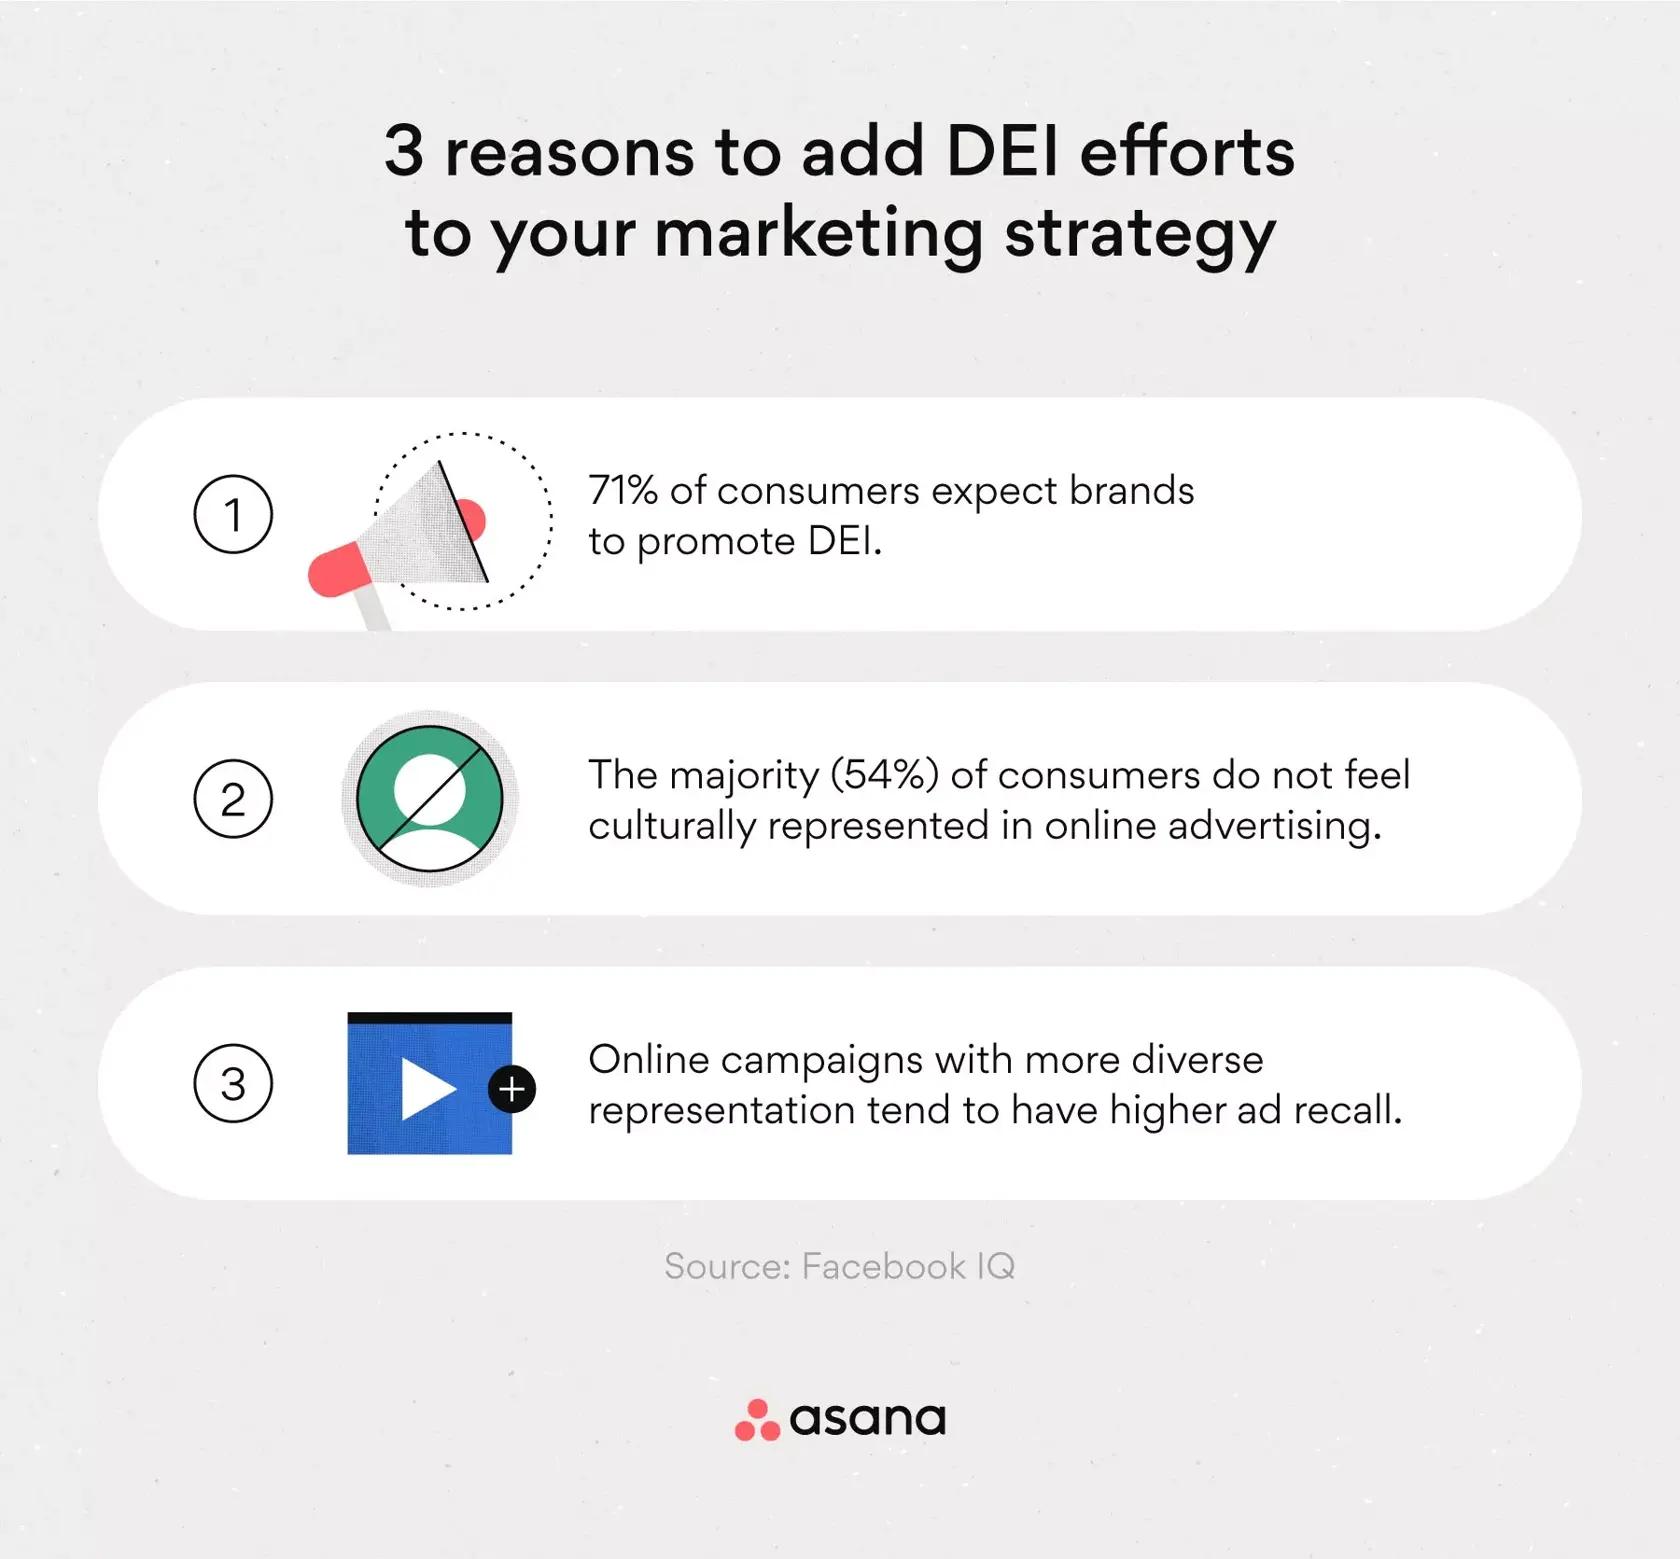 [Inline illustration] 3 reasons to add DEI efforts to your marketing strategy (infographic)